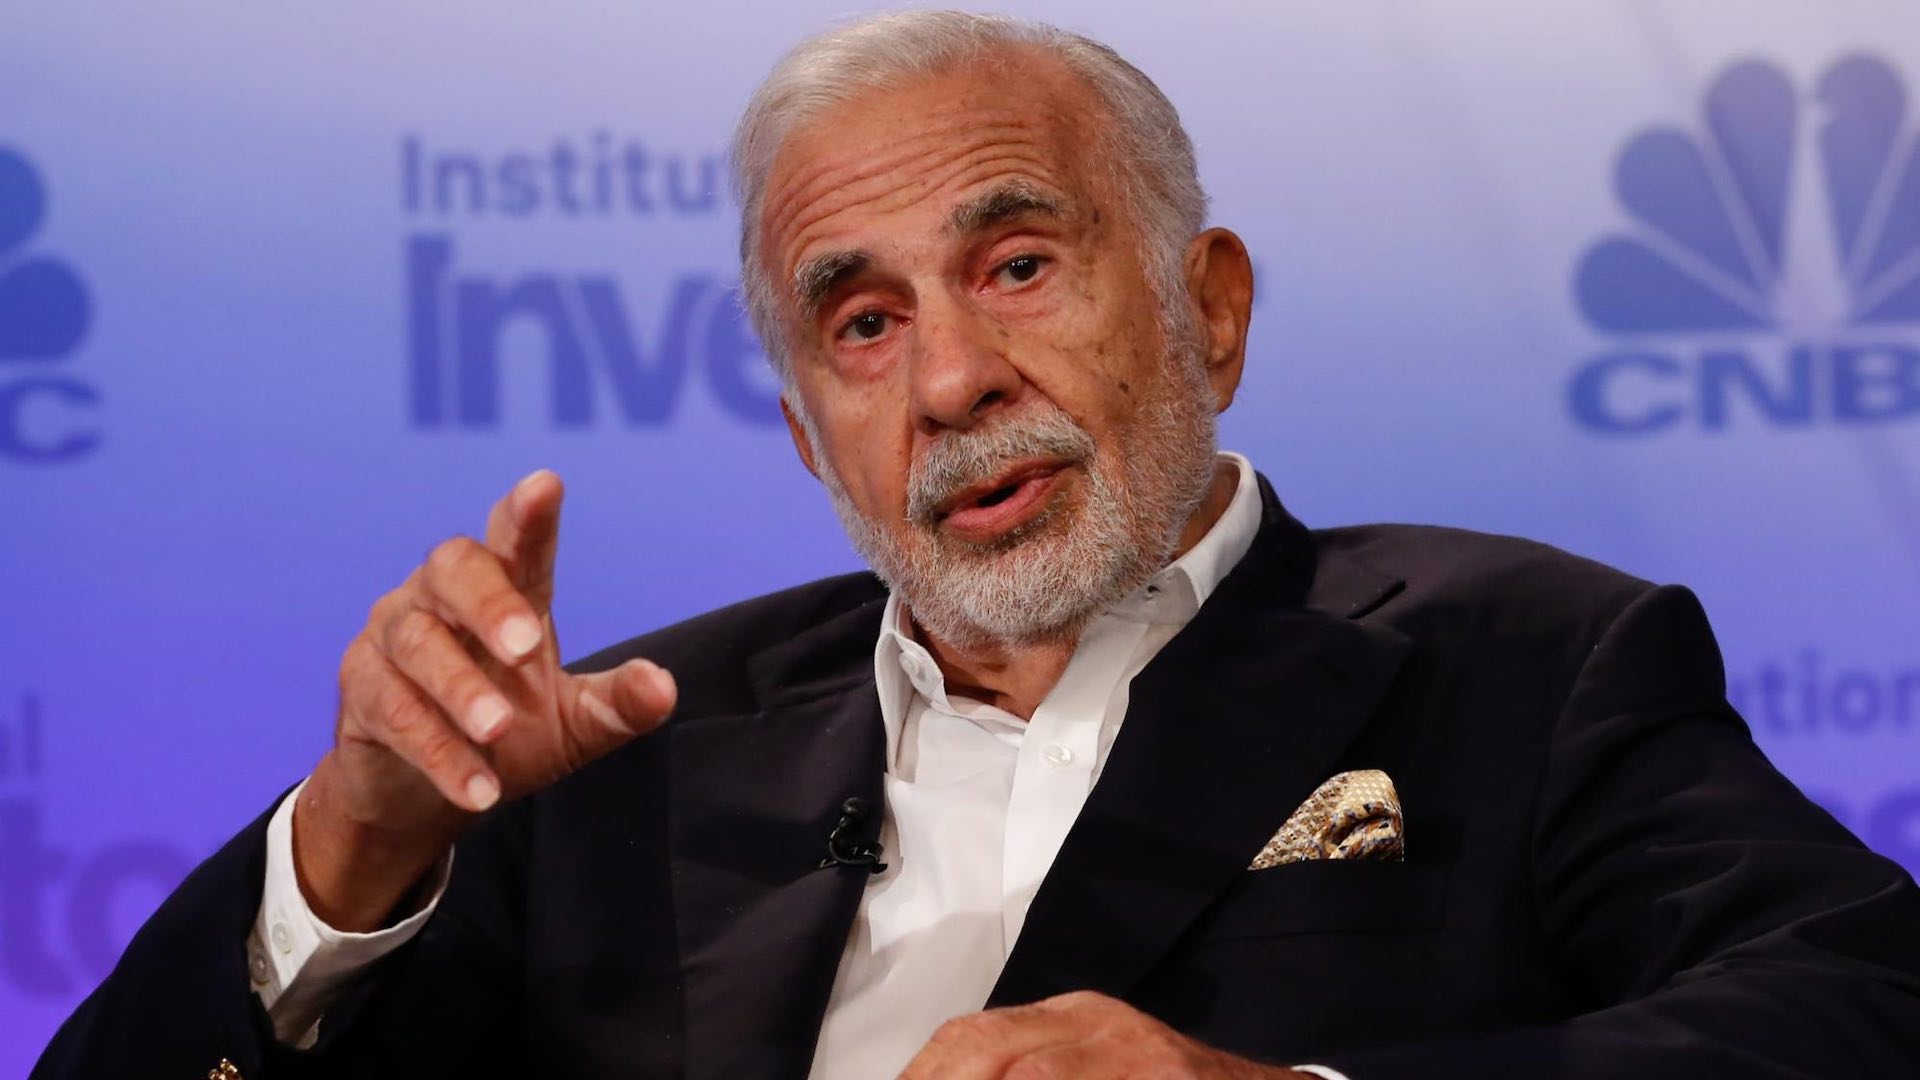 Carl Icahn on the defensive as Hindenburg Research alleges overvaluation